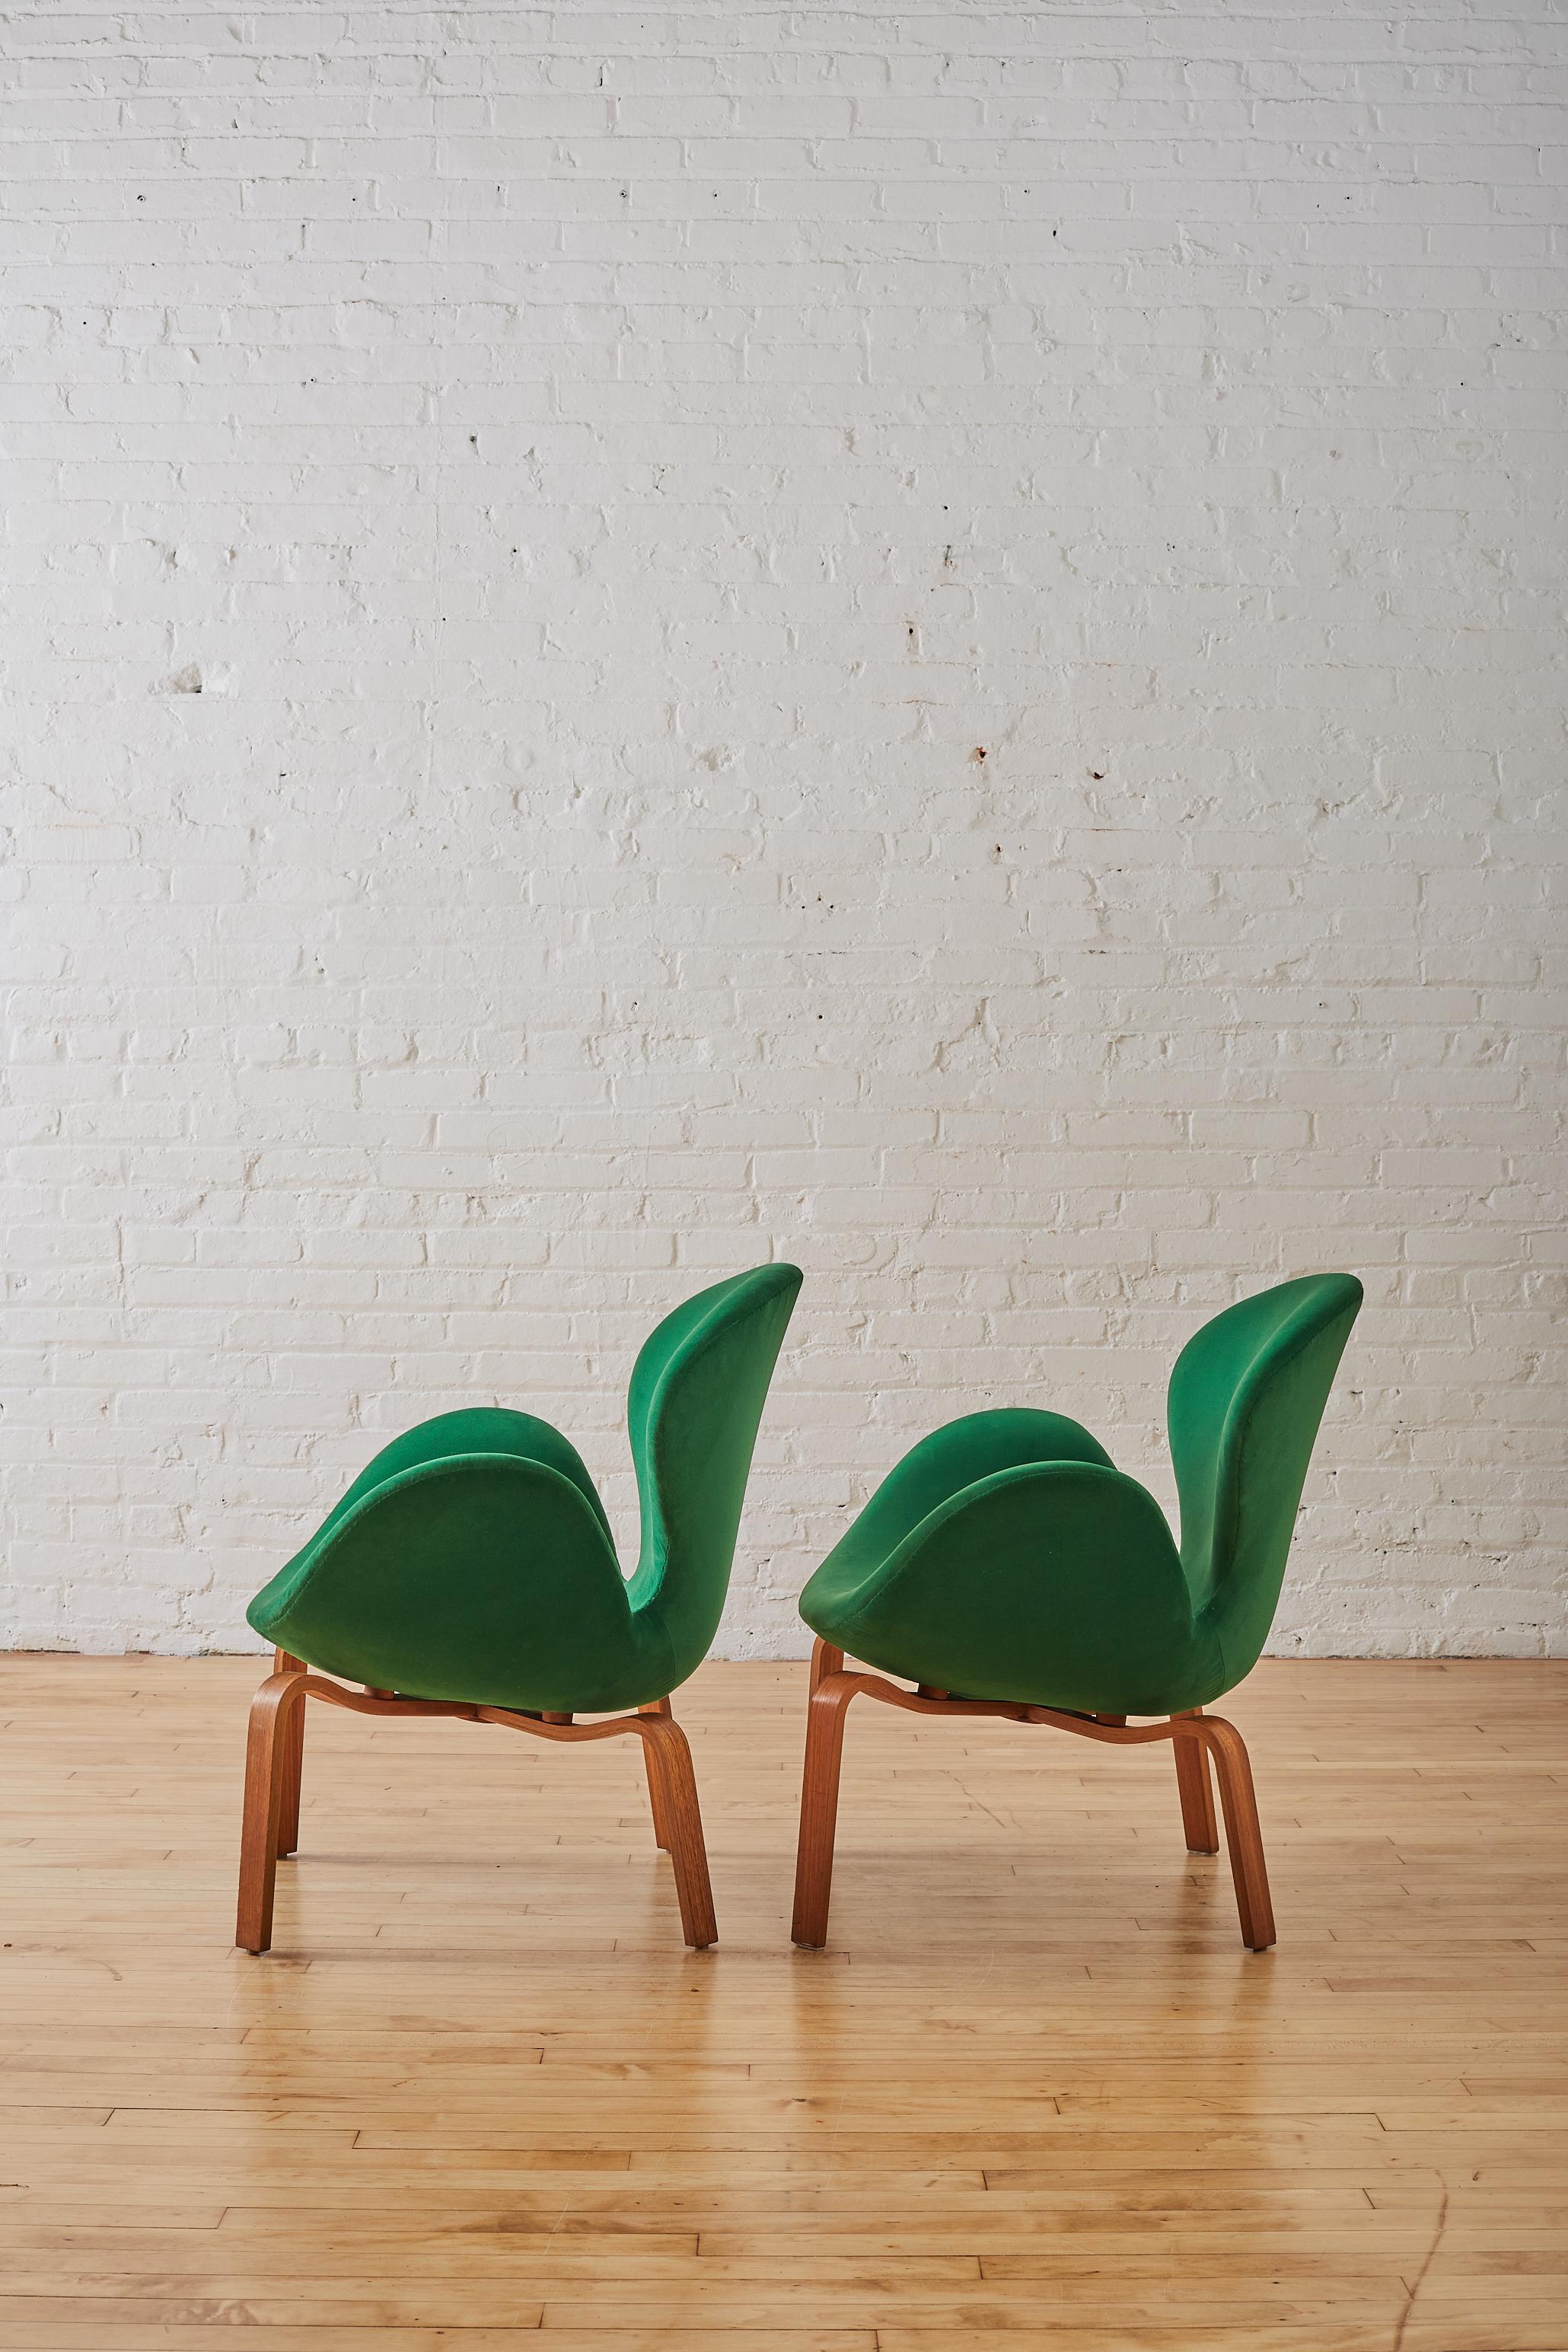 20th Century Pair of Arne Jacobsen 'Swan' Chairs ' Model No. 4325